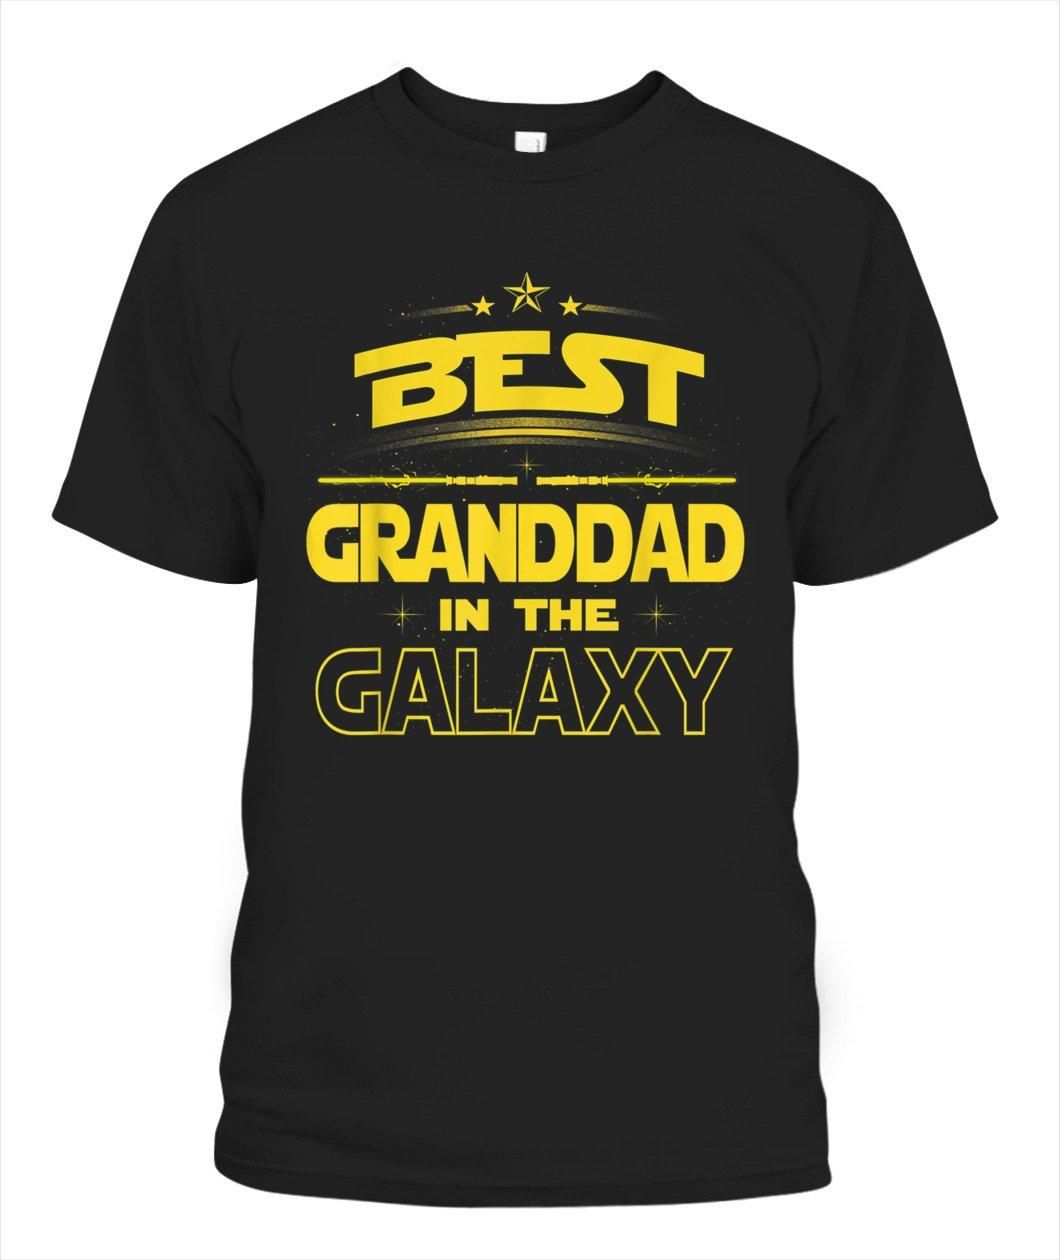 Best Granddad In The Galaxy Tee Shirt Fathers Day Gift Dad Tee Shirt